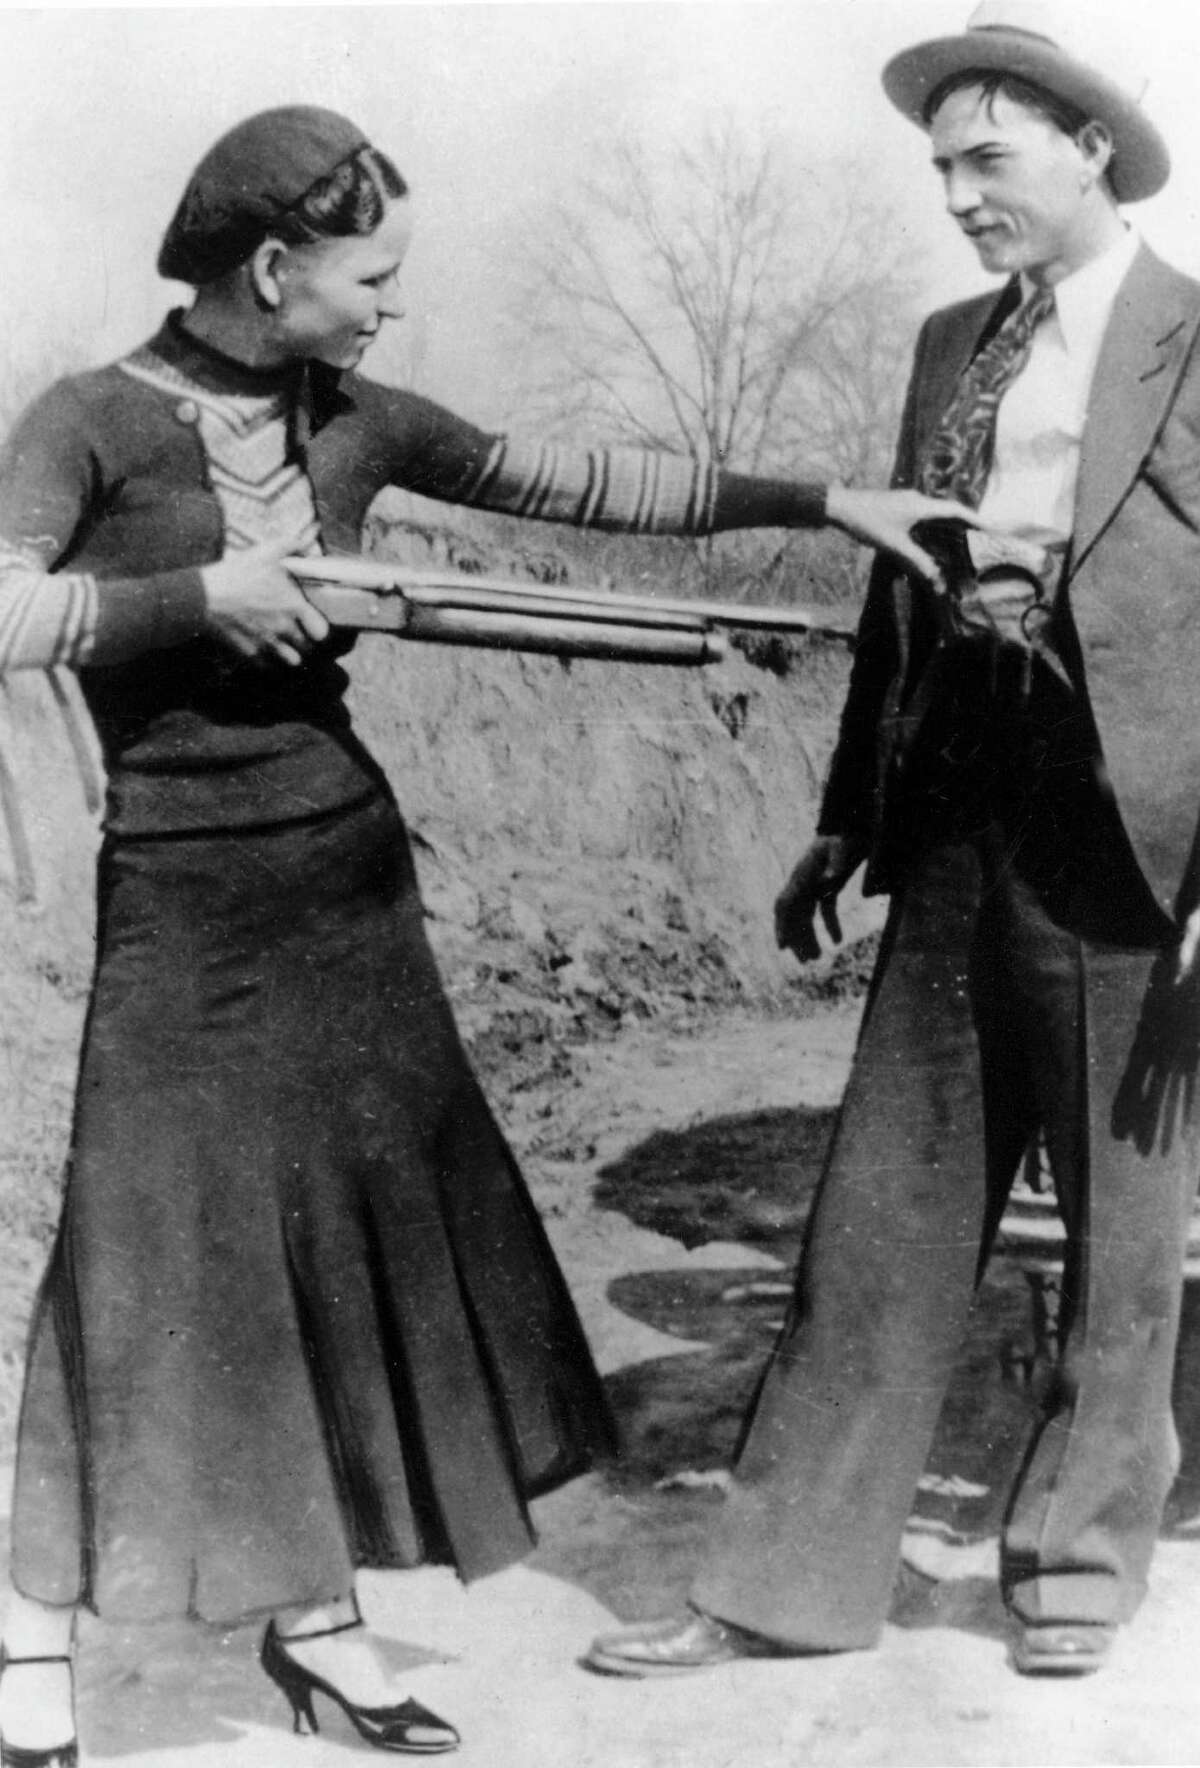 FILE - This this undated file photo shows outlaws and lovers Bonnie Parker, left, and Clyde Barrow. Guns and other items connected to the couple are going on auction by RR Auction of Amherst, N.H. An auction official estimated Thursday, July 12, 2012, that the handguns found on the duo after they were shot dead each could fetch between $100,000 and $200,000. (AP Photo/File)